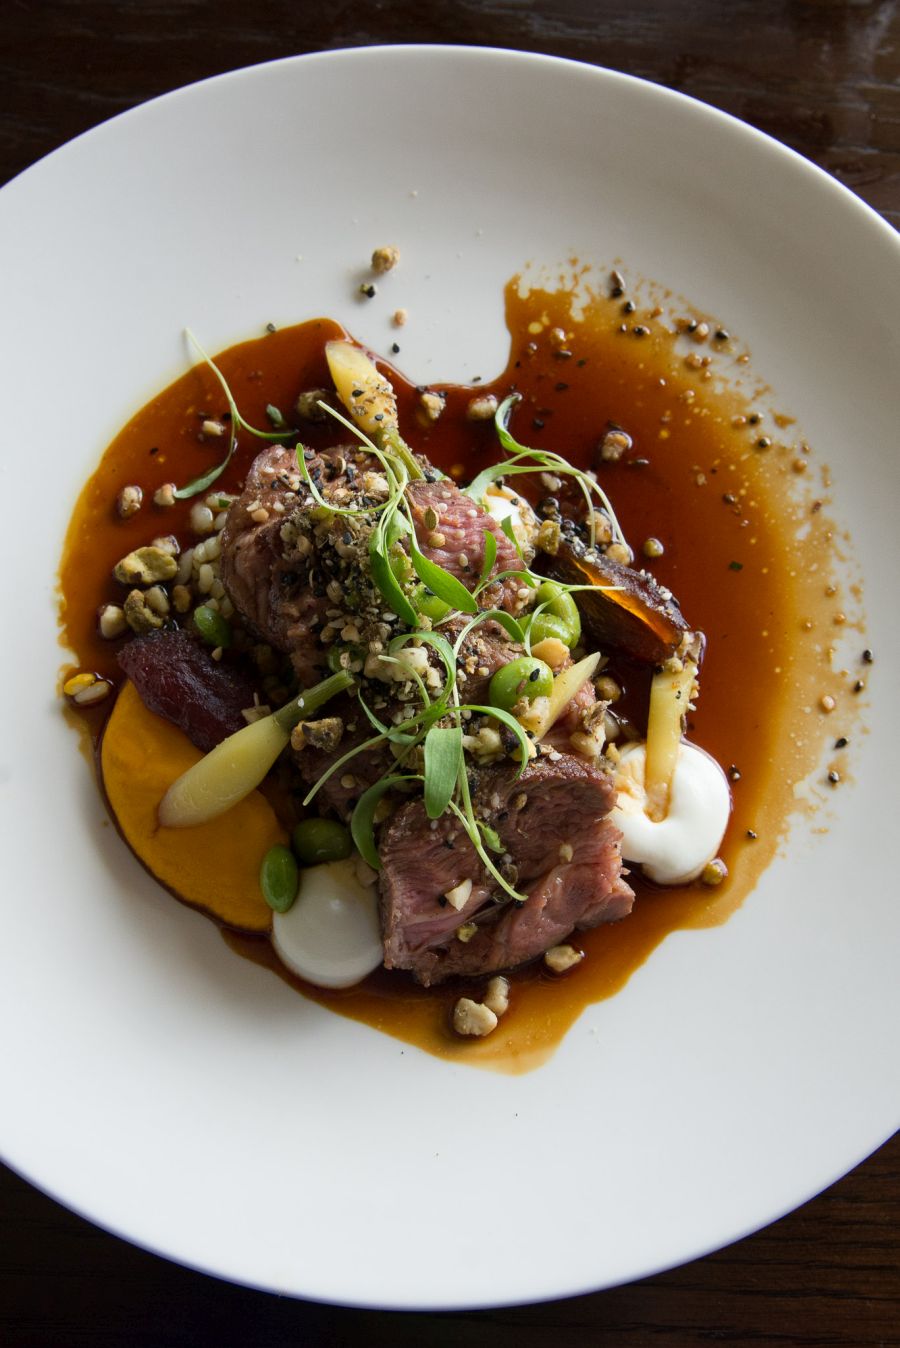 Southland lamb with carrots, date, wheat and sheep's yoghurt (NZ$45)